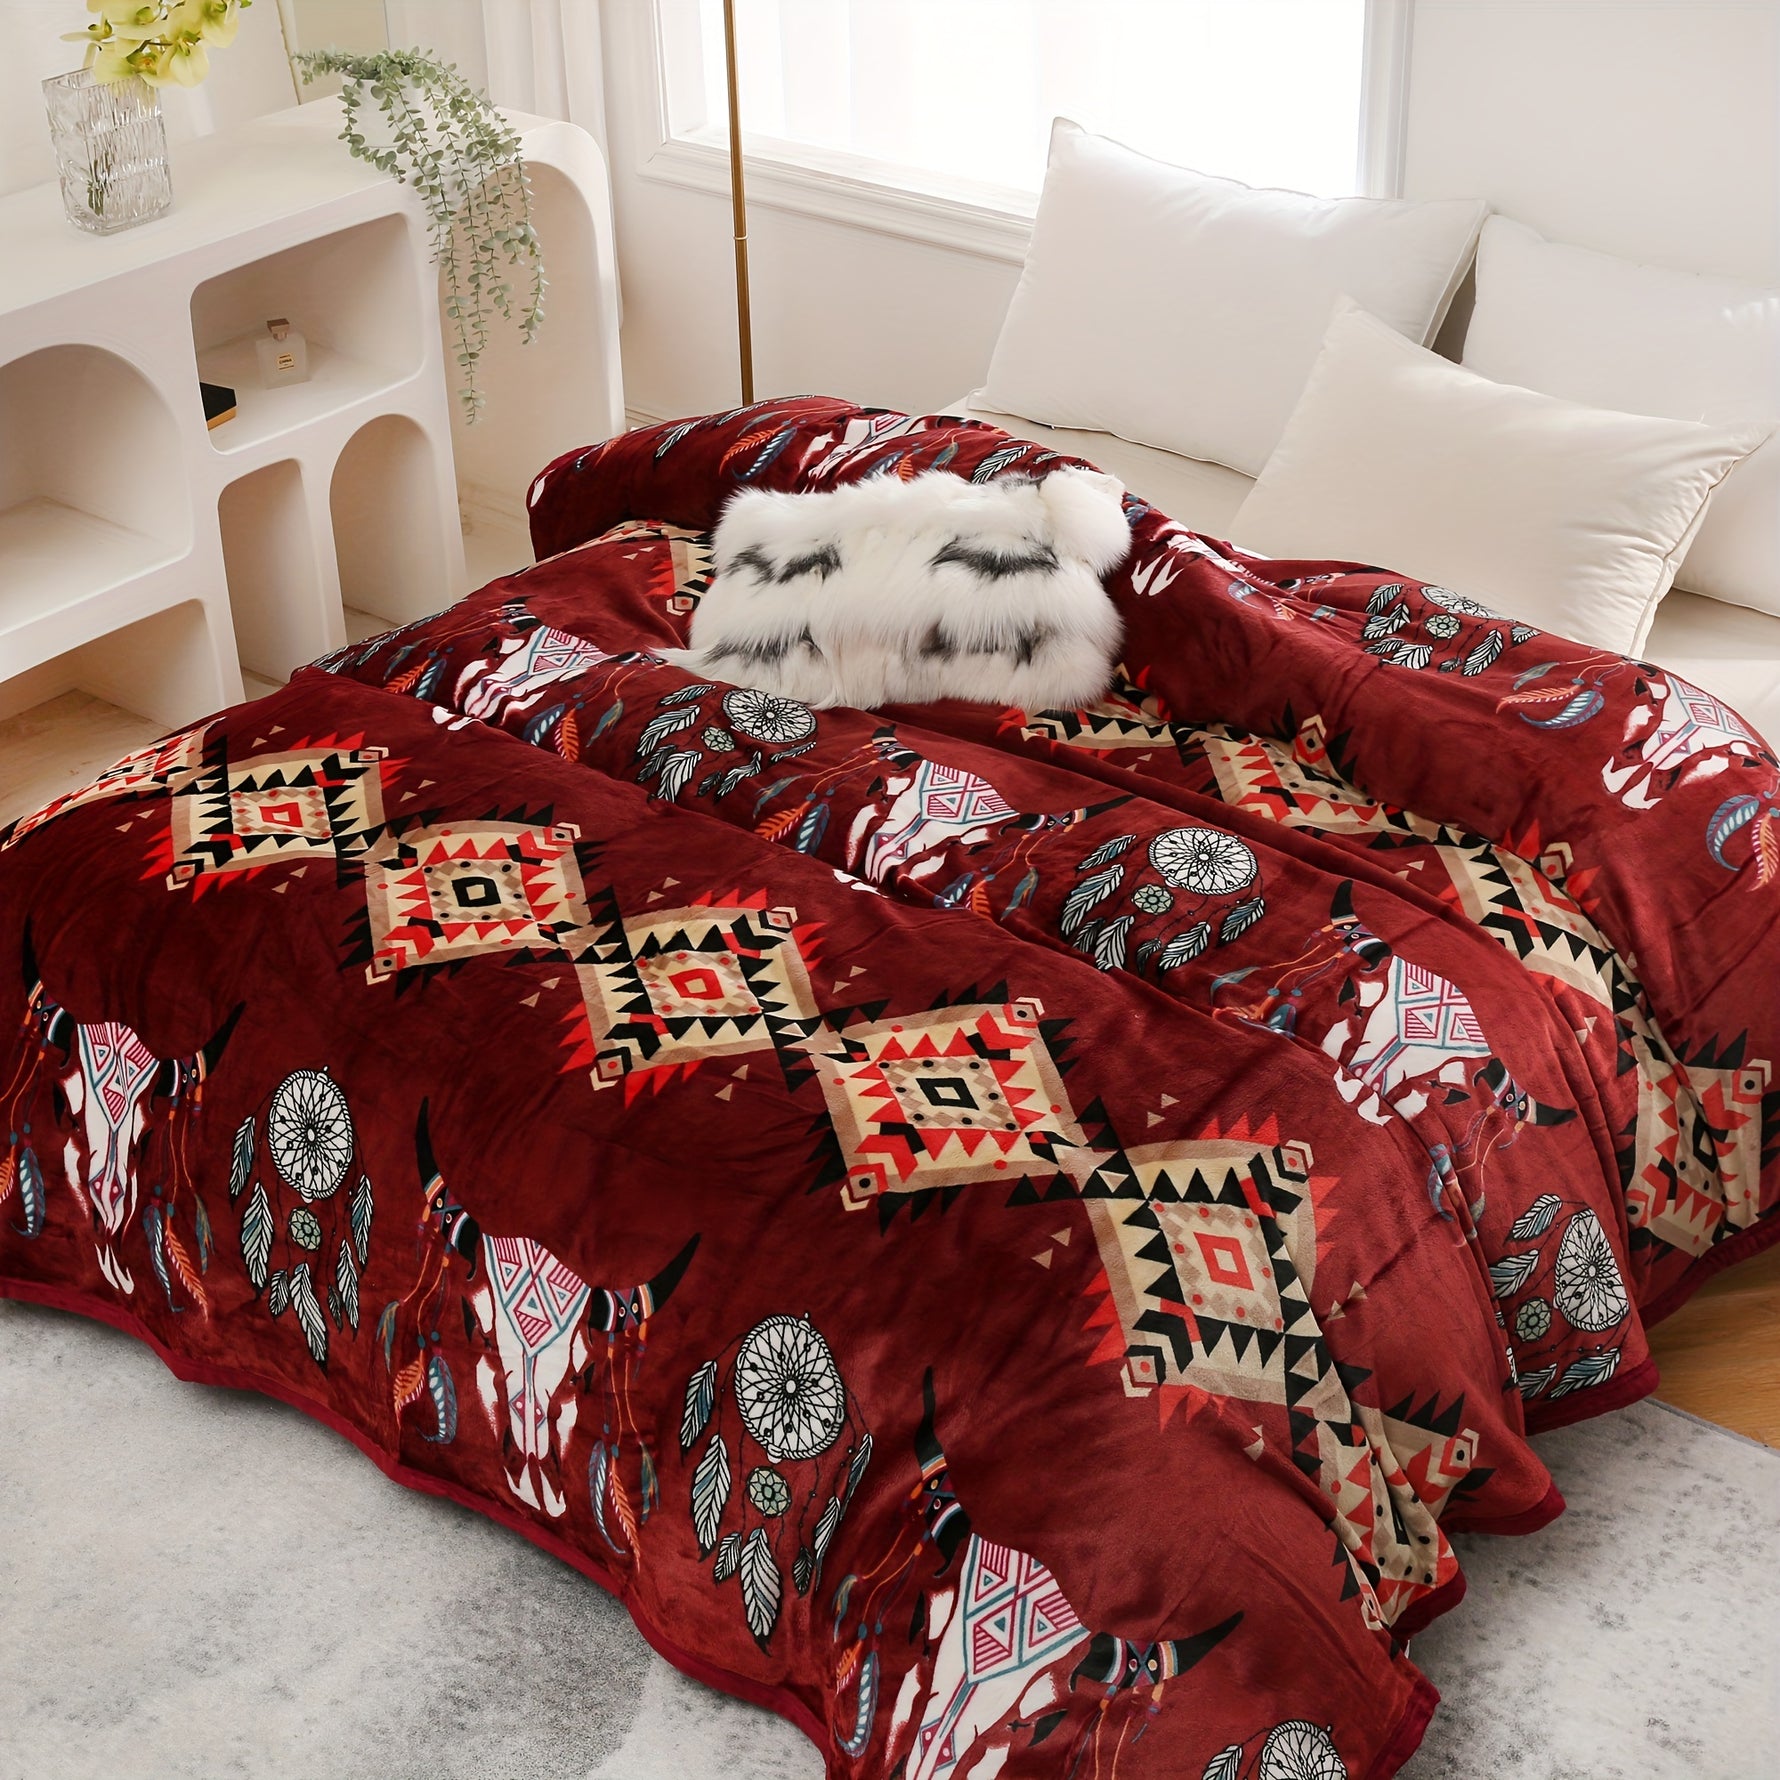 1pc Ethnic Style Print Blanket 400gsm Flannel Blanket Soft Warm Throw Blanket Nap Blanket For Couch Sofa Office Bed Camping Travel Multipurpose Gift Blanket For All Season